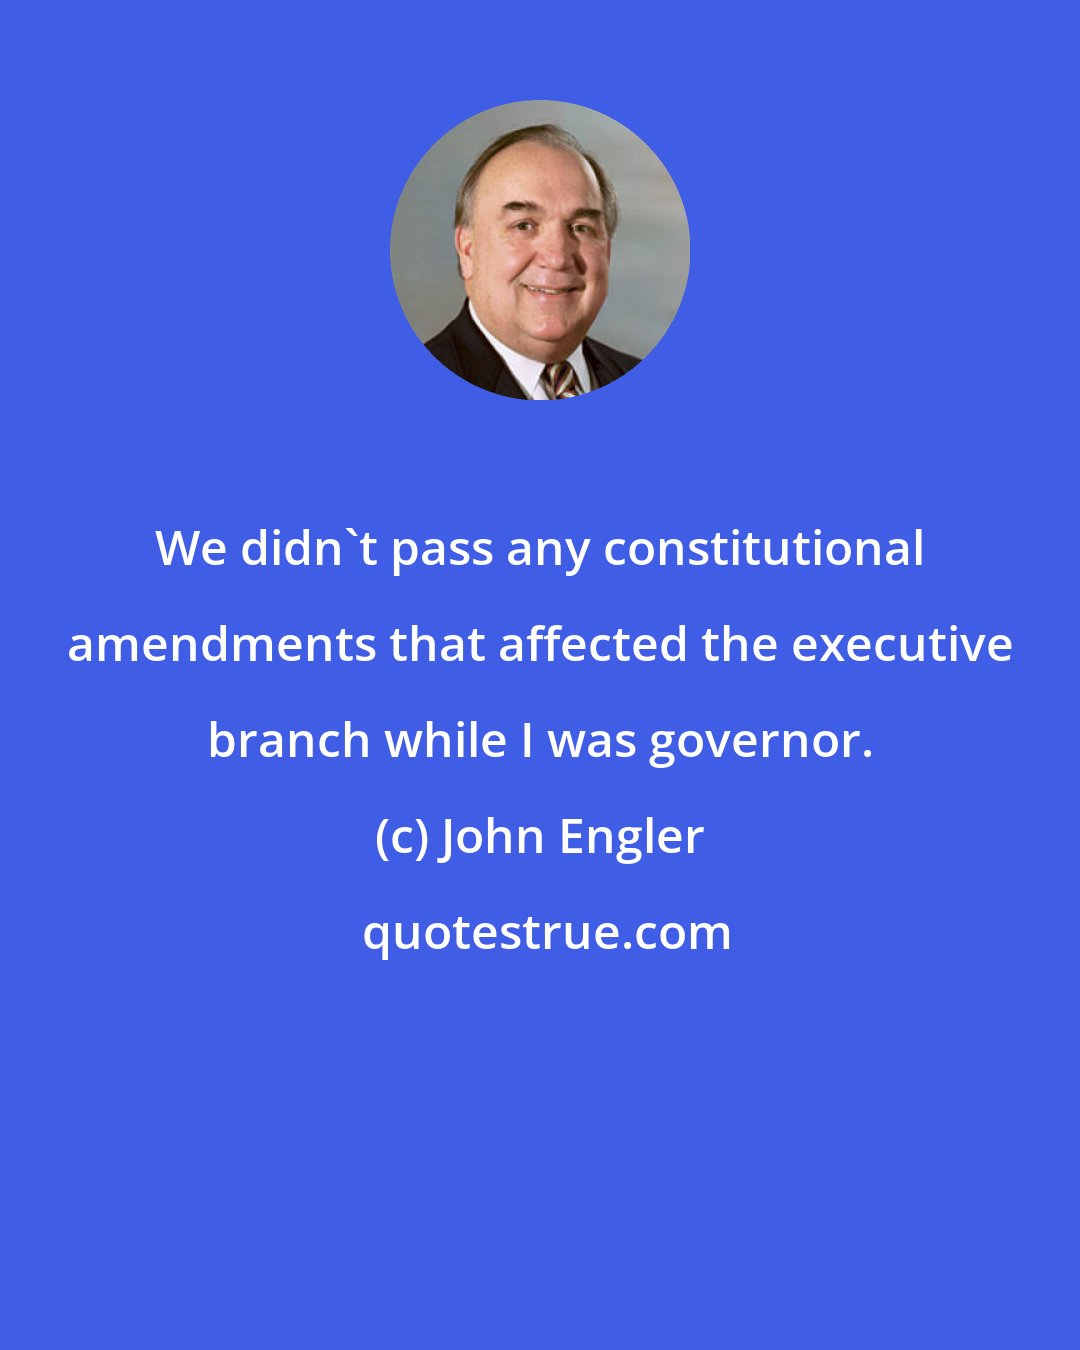 John Engler: We didn't pass any constitutional amendments that affected the executive branch while I was governor.